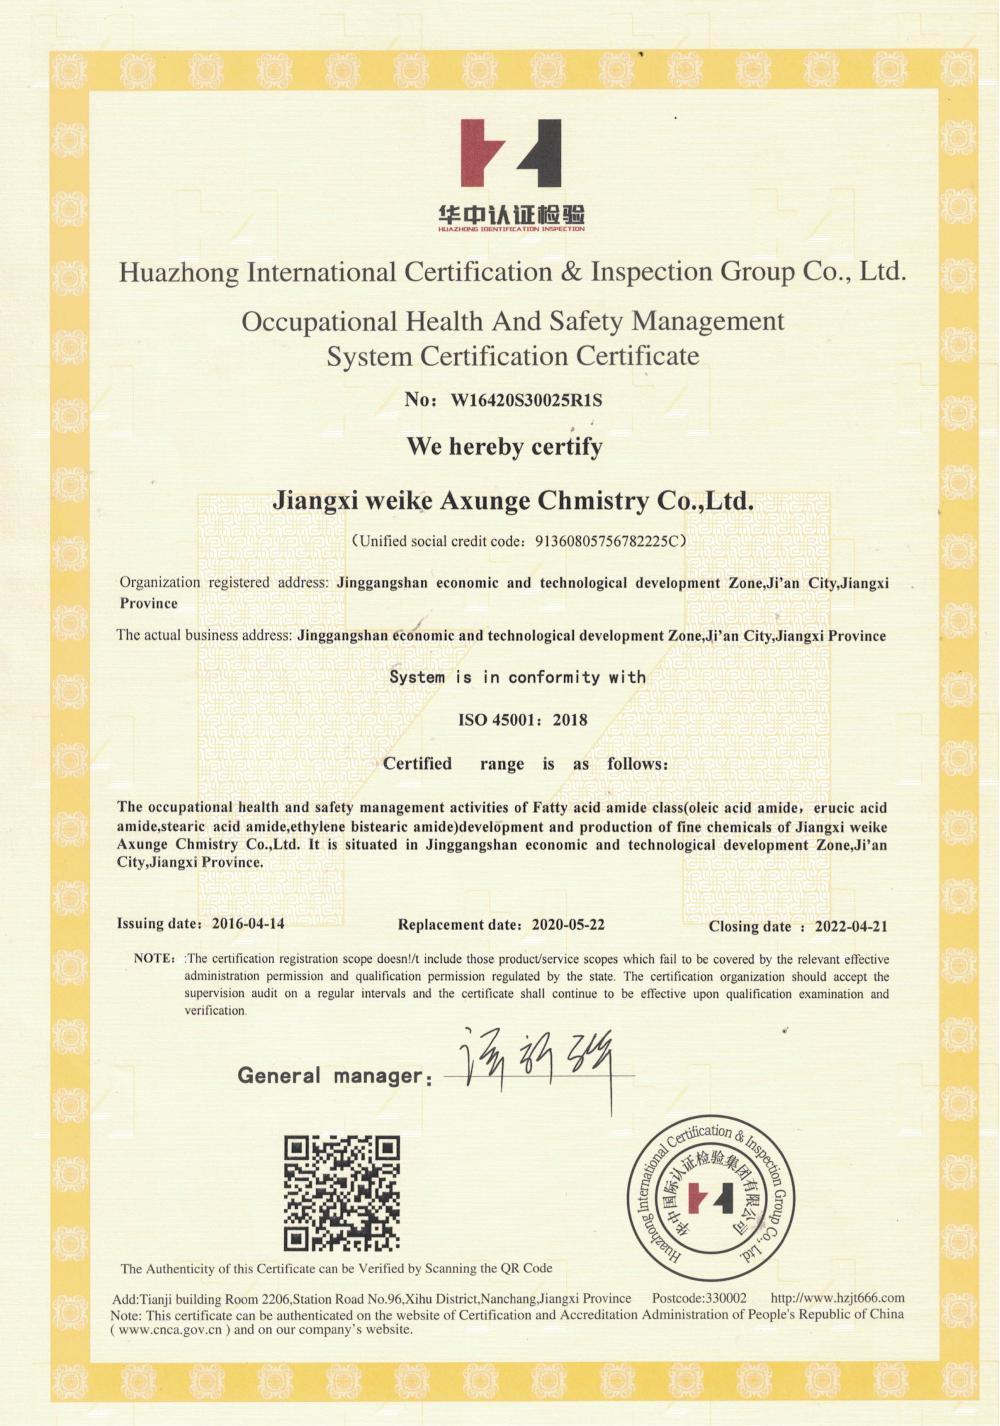 Certification certificate of occupational health and safety management system